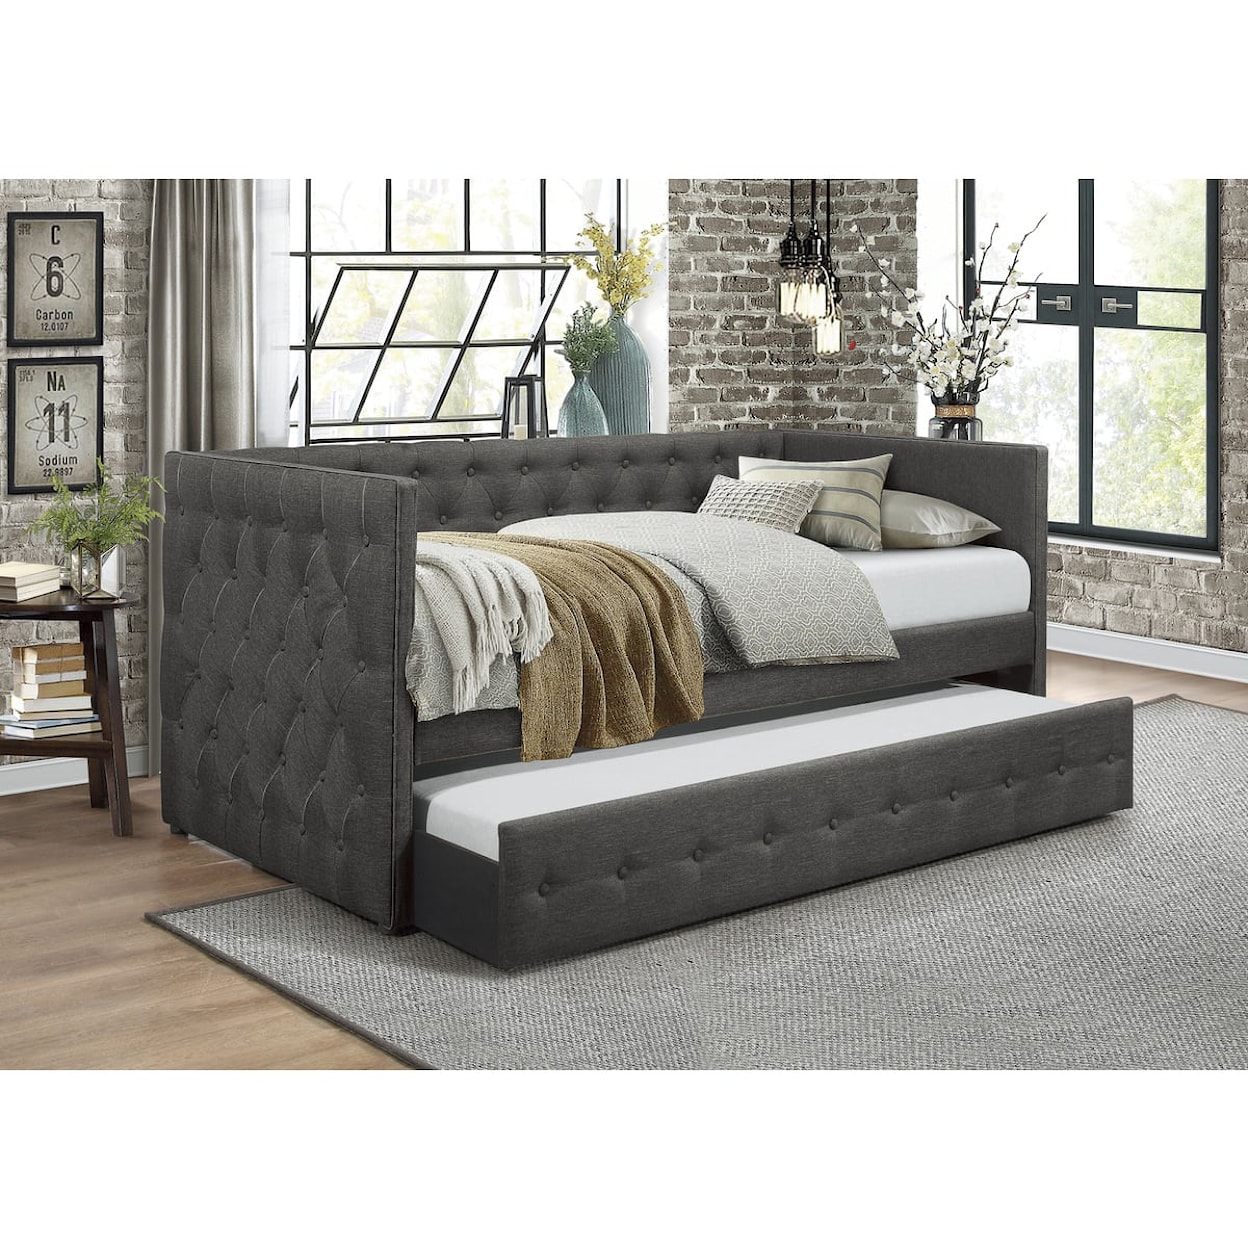 Homelegance Batavia Daybed with Trundle